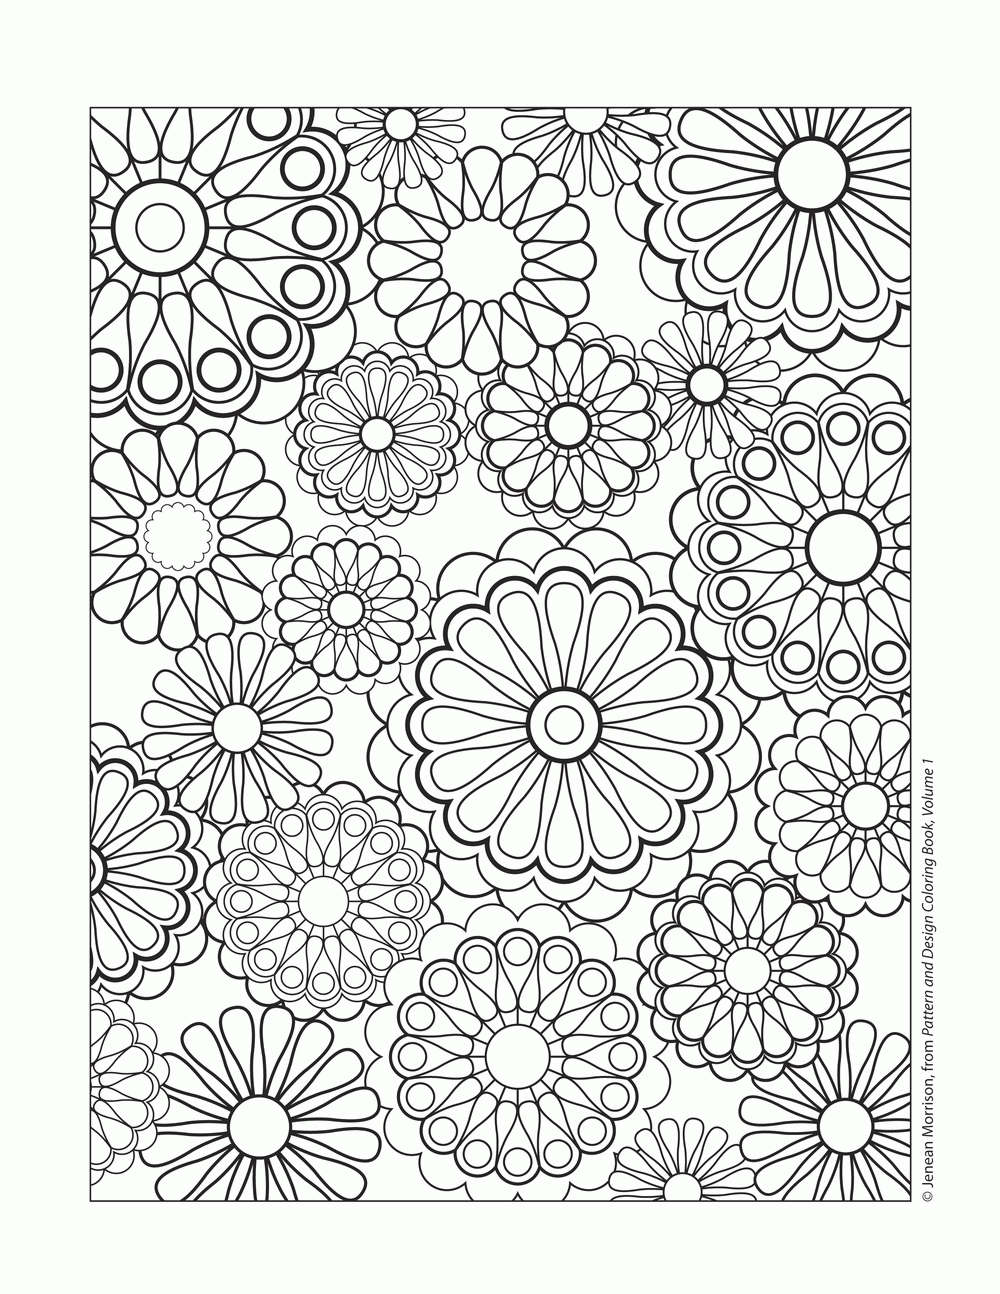 Pattern Coloring Pages - Bestofcoloring.com